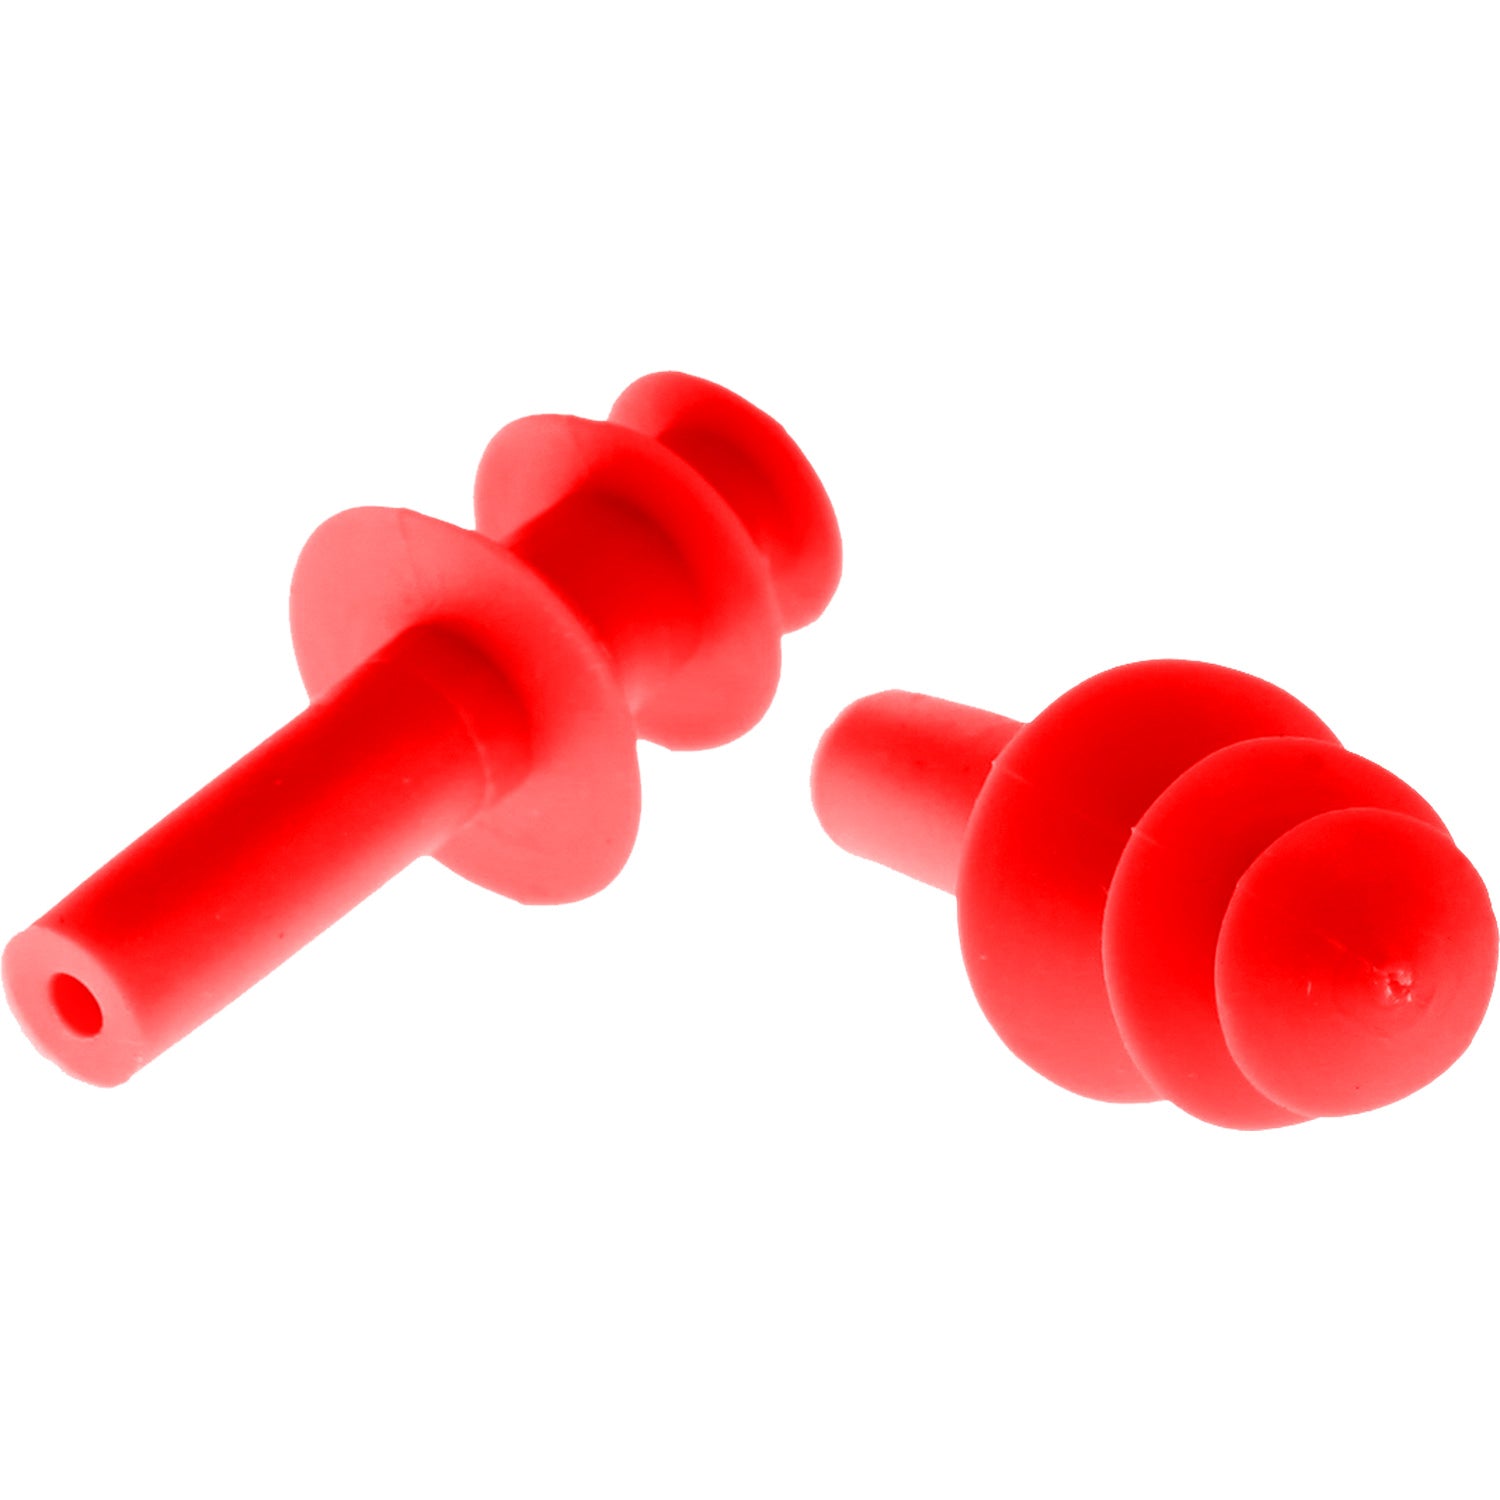 LIFT Safety - FLANGE Ear Plugs